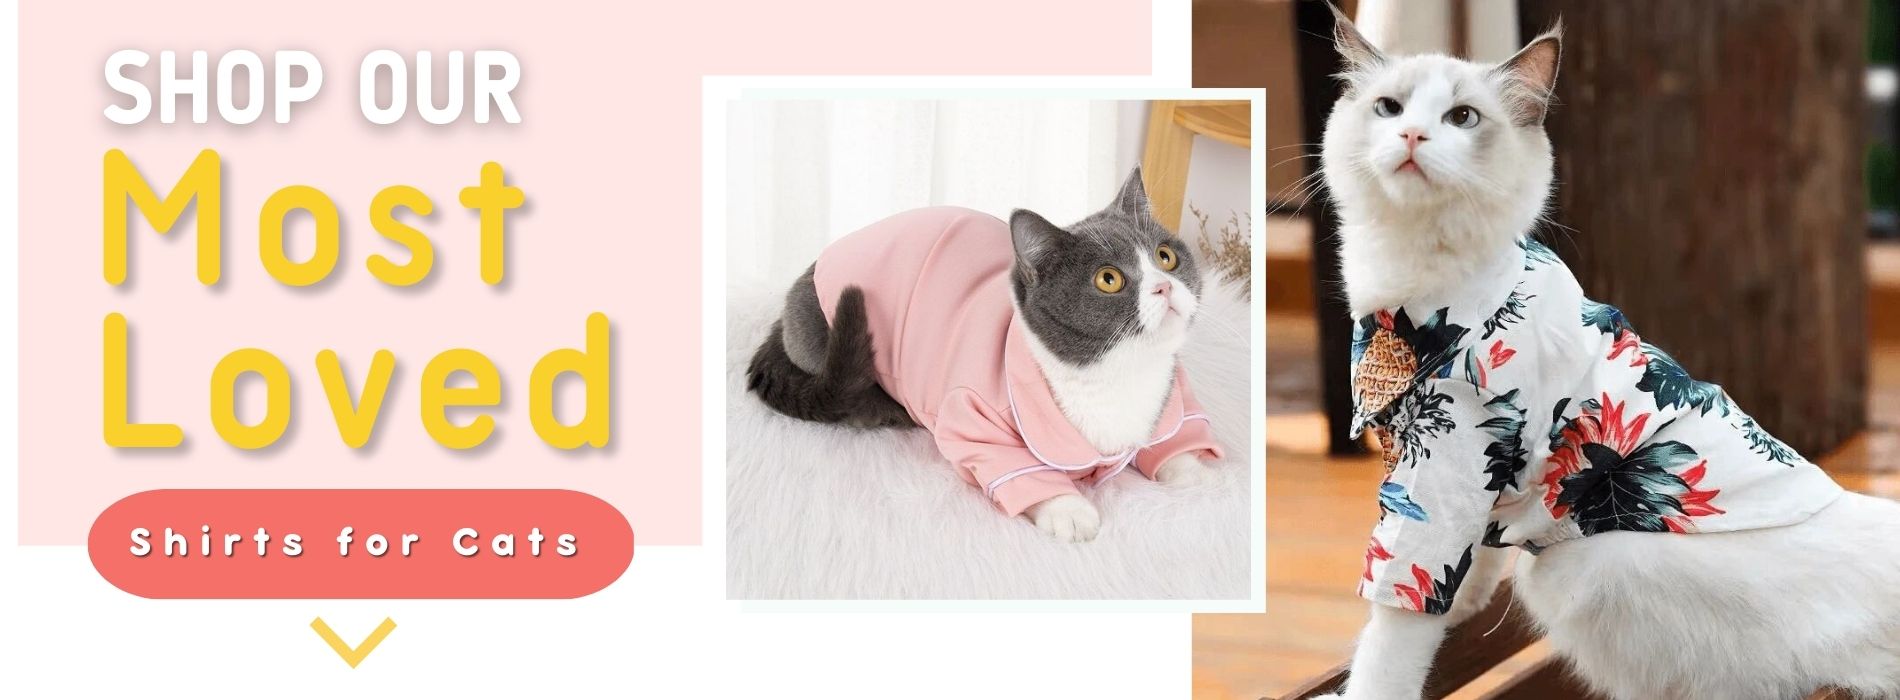 shirts-for-cats